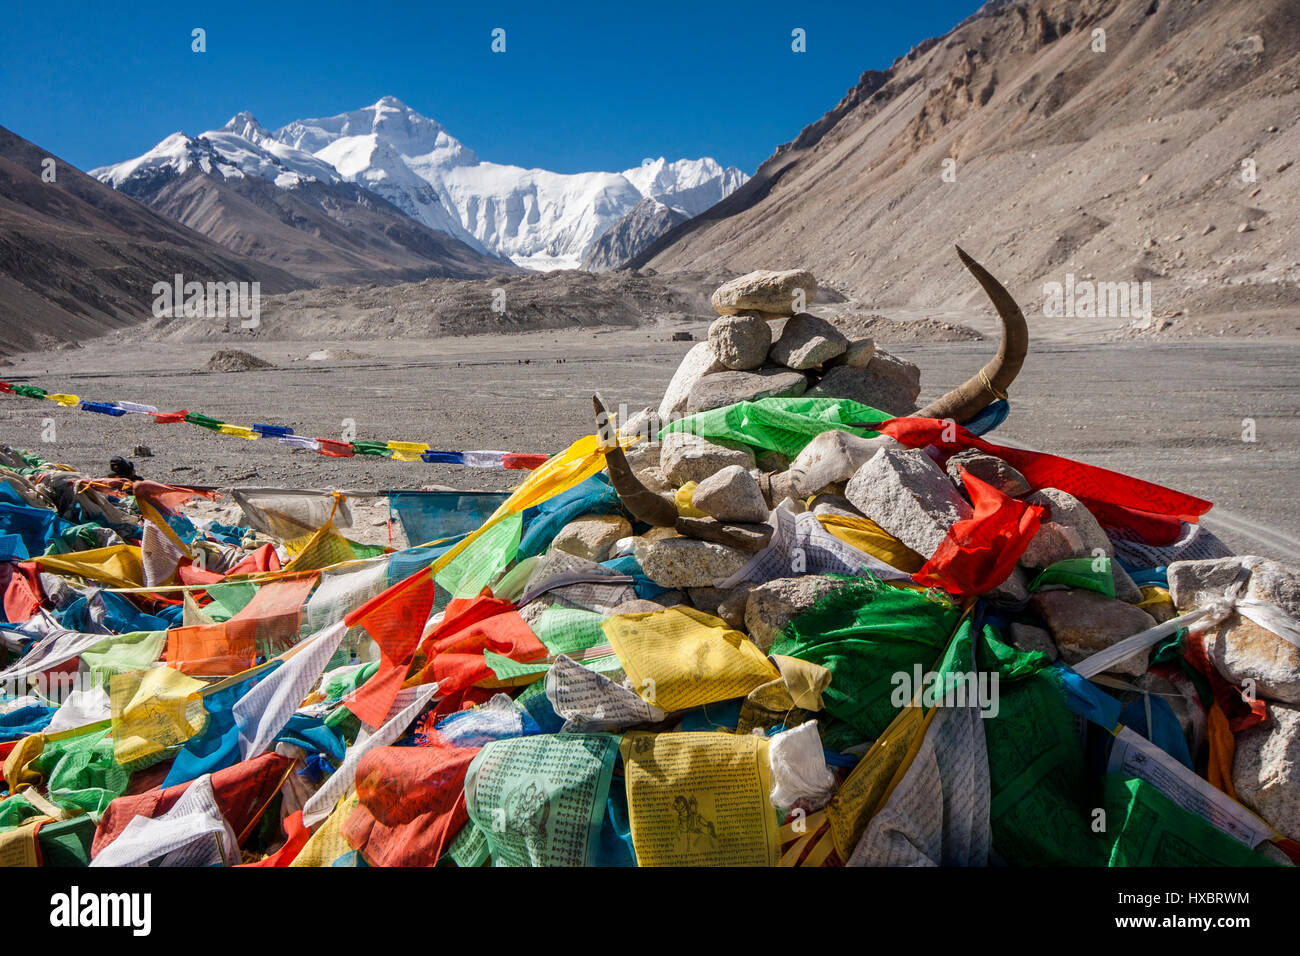 The North Face of Mount Everest and Tibetan prayer flags Stock Photo